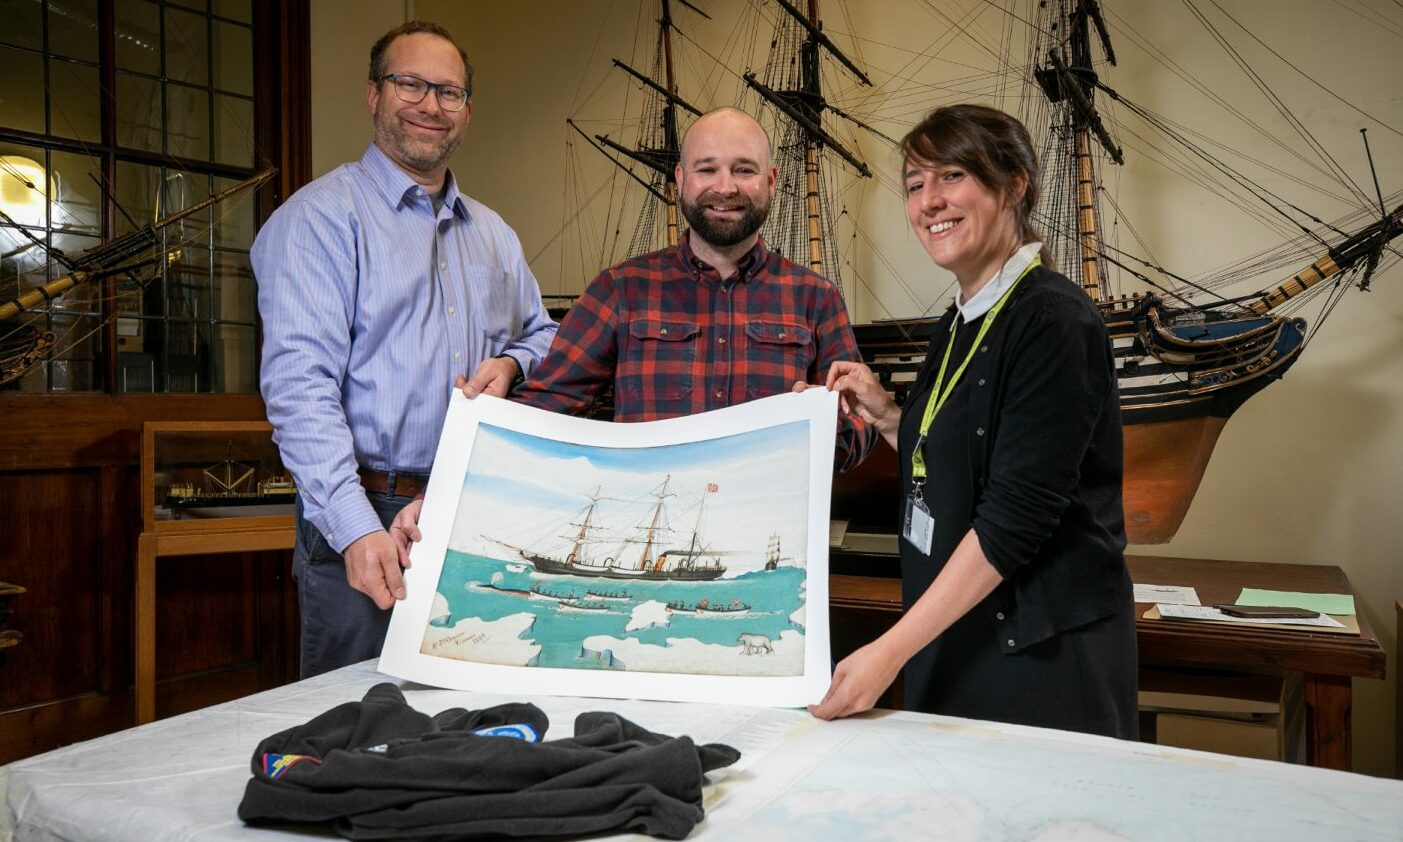 Dundee whaling ship captain 'ignored' by history, says researcher who wants to rebuild ties with Arctic Inuits